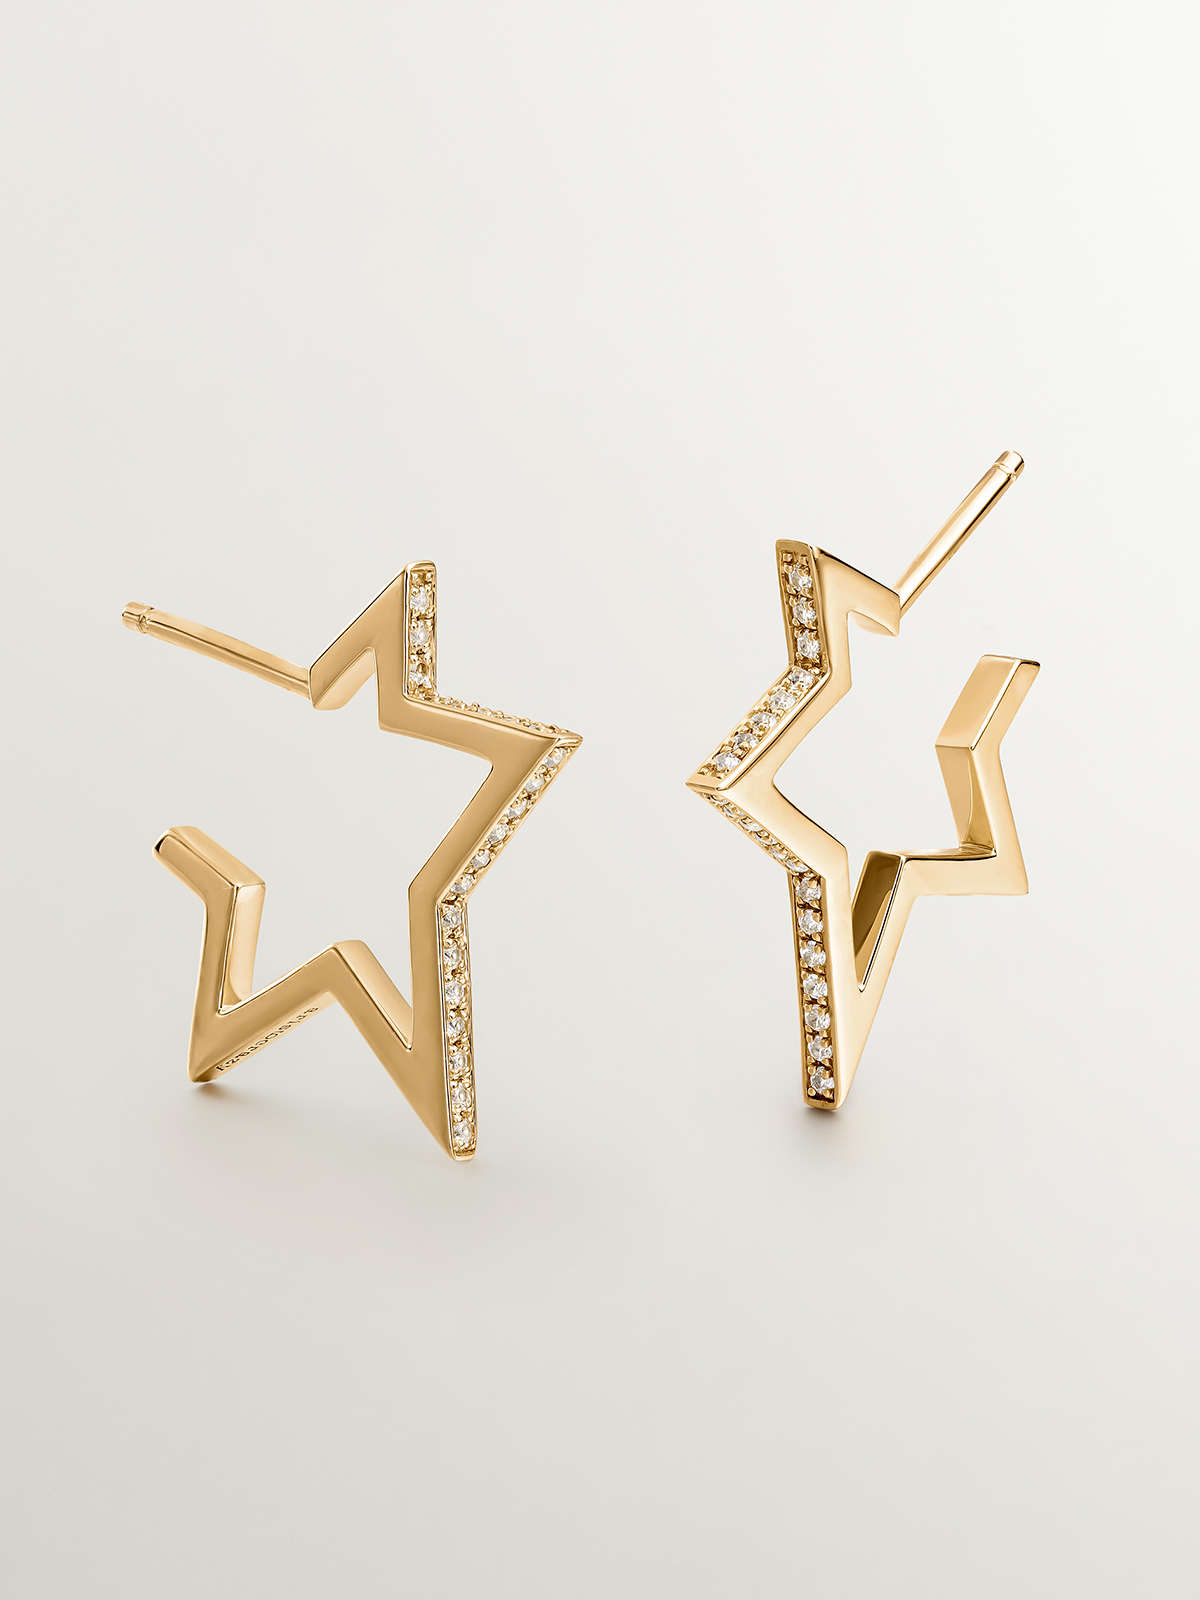 925 Silver earrings bathed in 18K yellow gold in the shape of a star with white topaz.